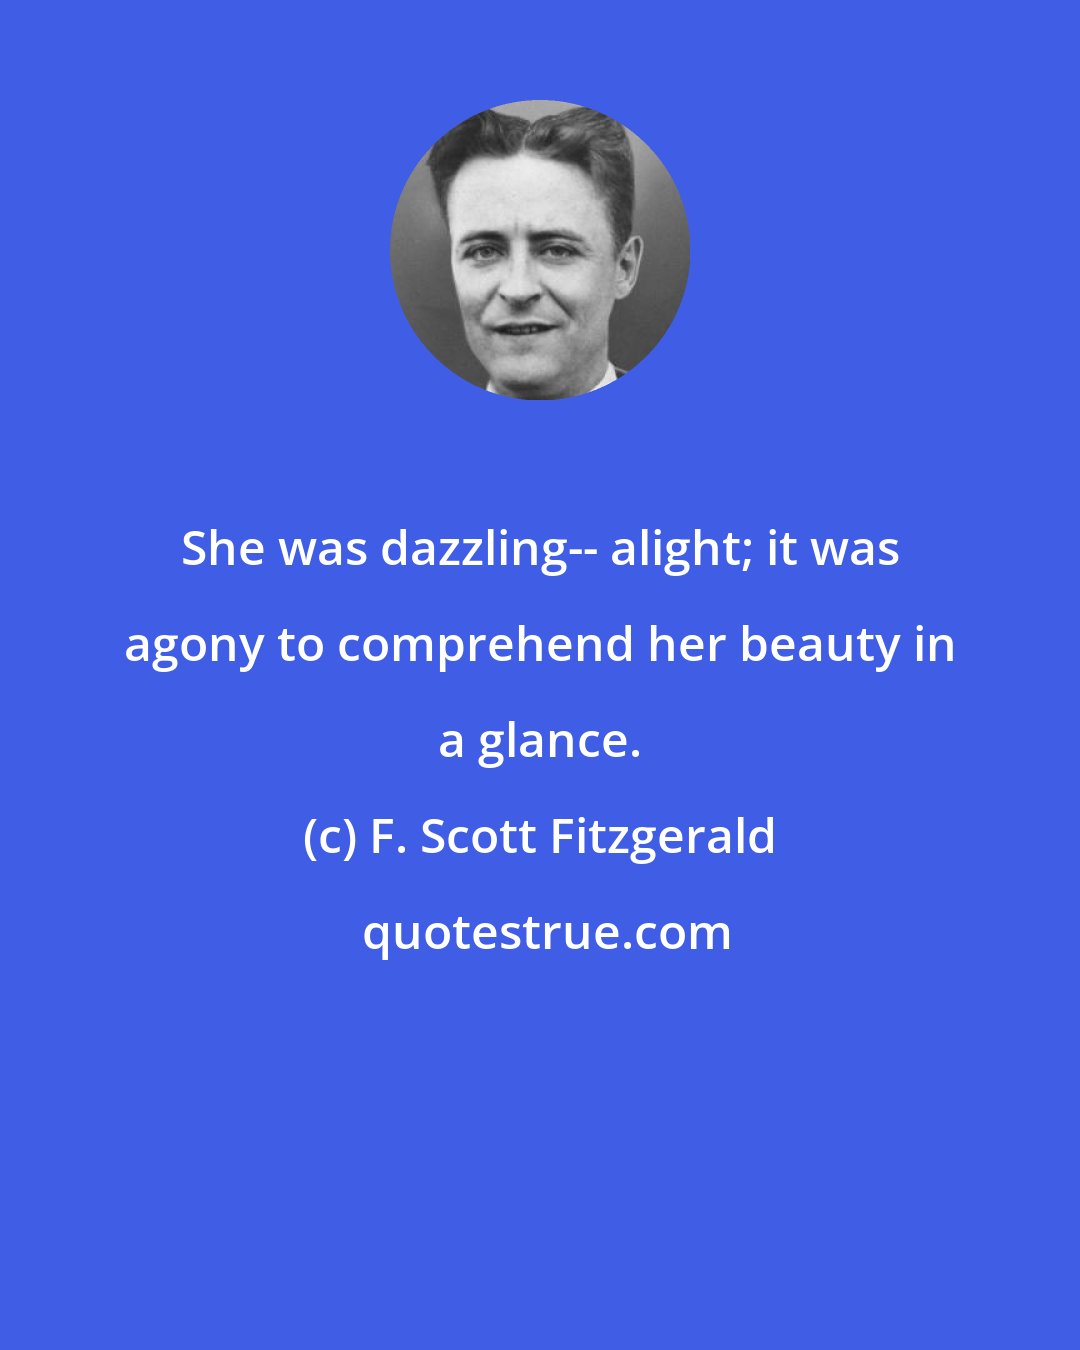 F. Scott Fitzgerald: She was dazzling-- alight; it was agony to comprehend her beauty in a glance.